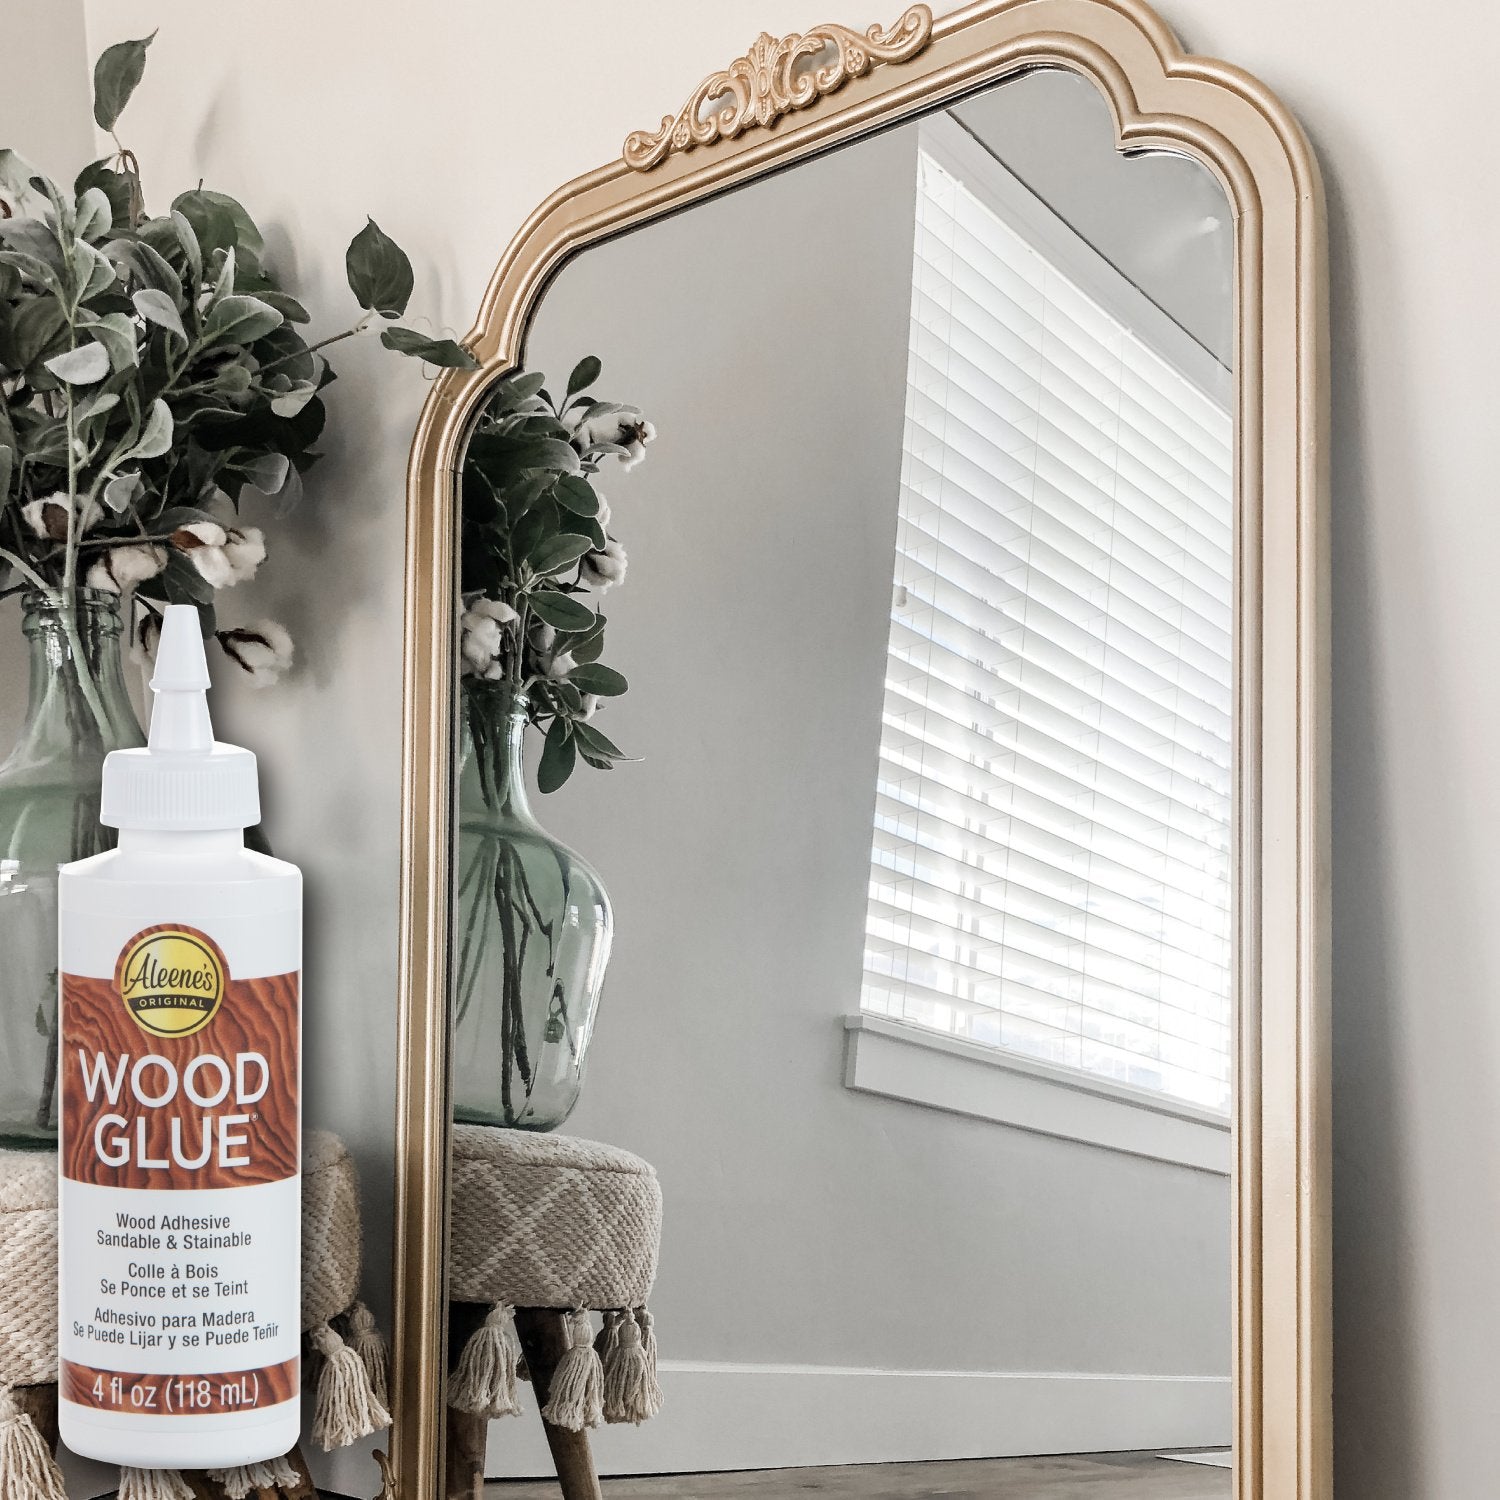 15 Best Glue Products for Home Repairs Without Tools